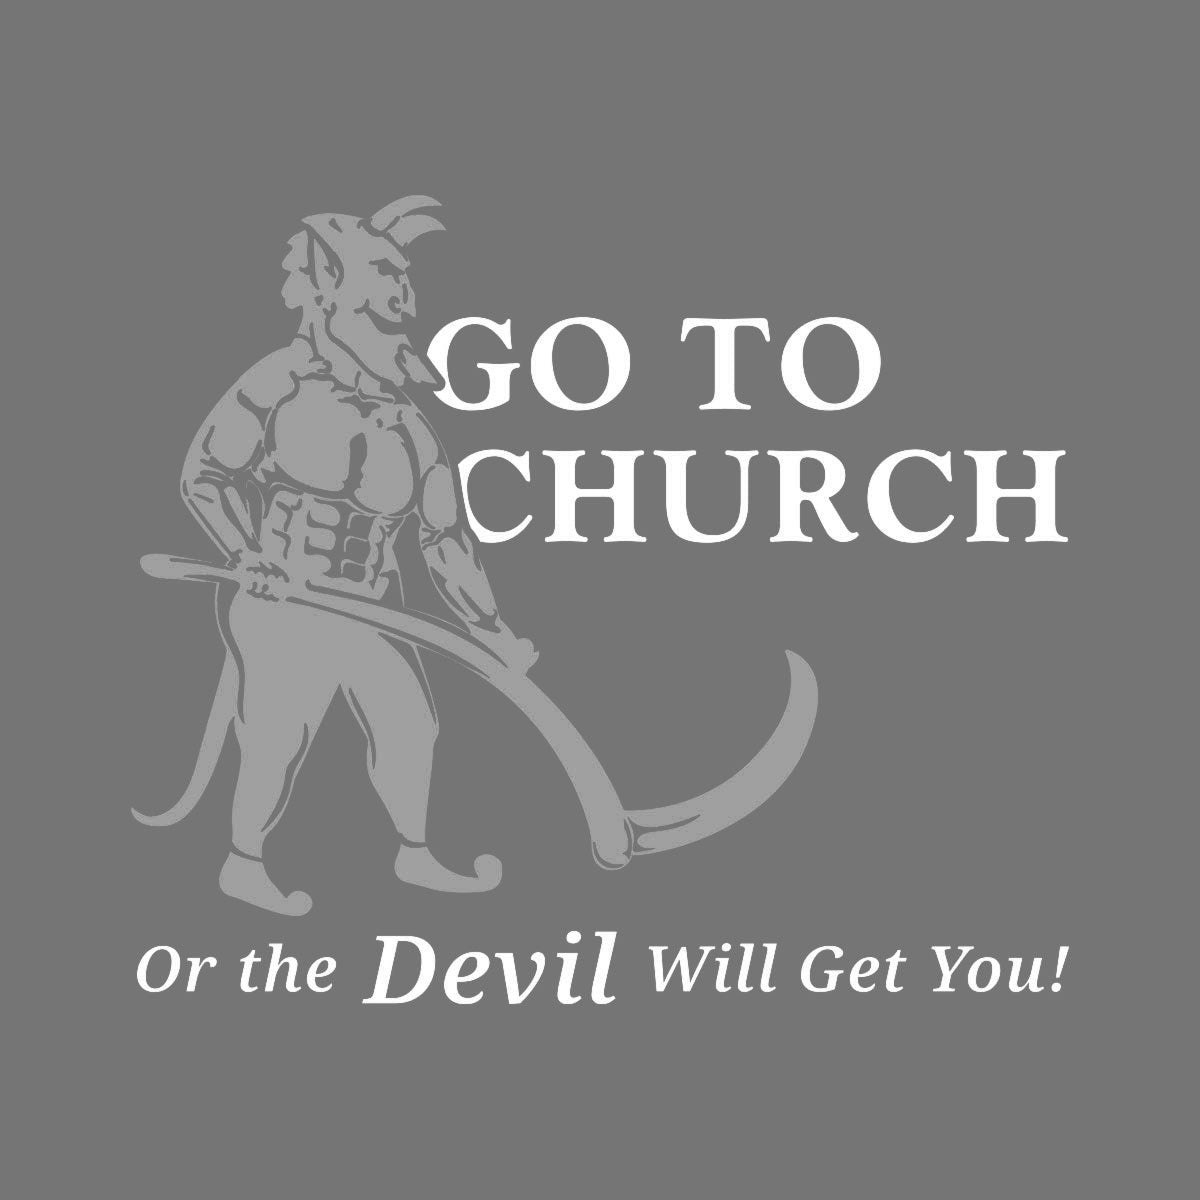 Thumbnail of a devil with text " Go to Church or the Devil Will Get You!"